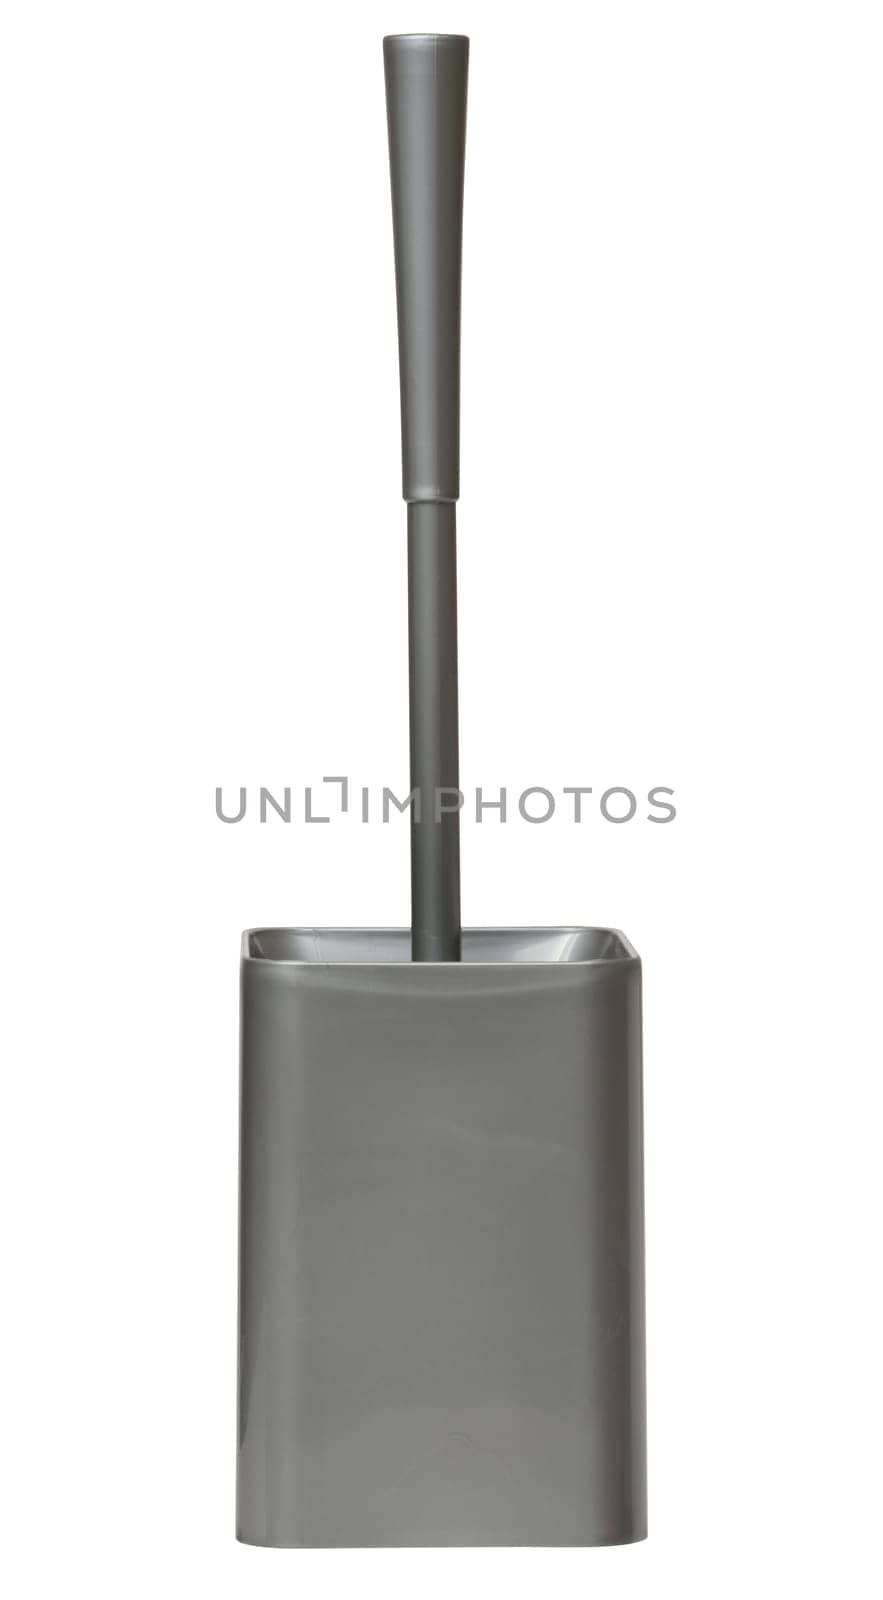 Gray plastic toilet brush with stand on isolated background